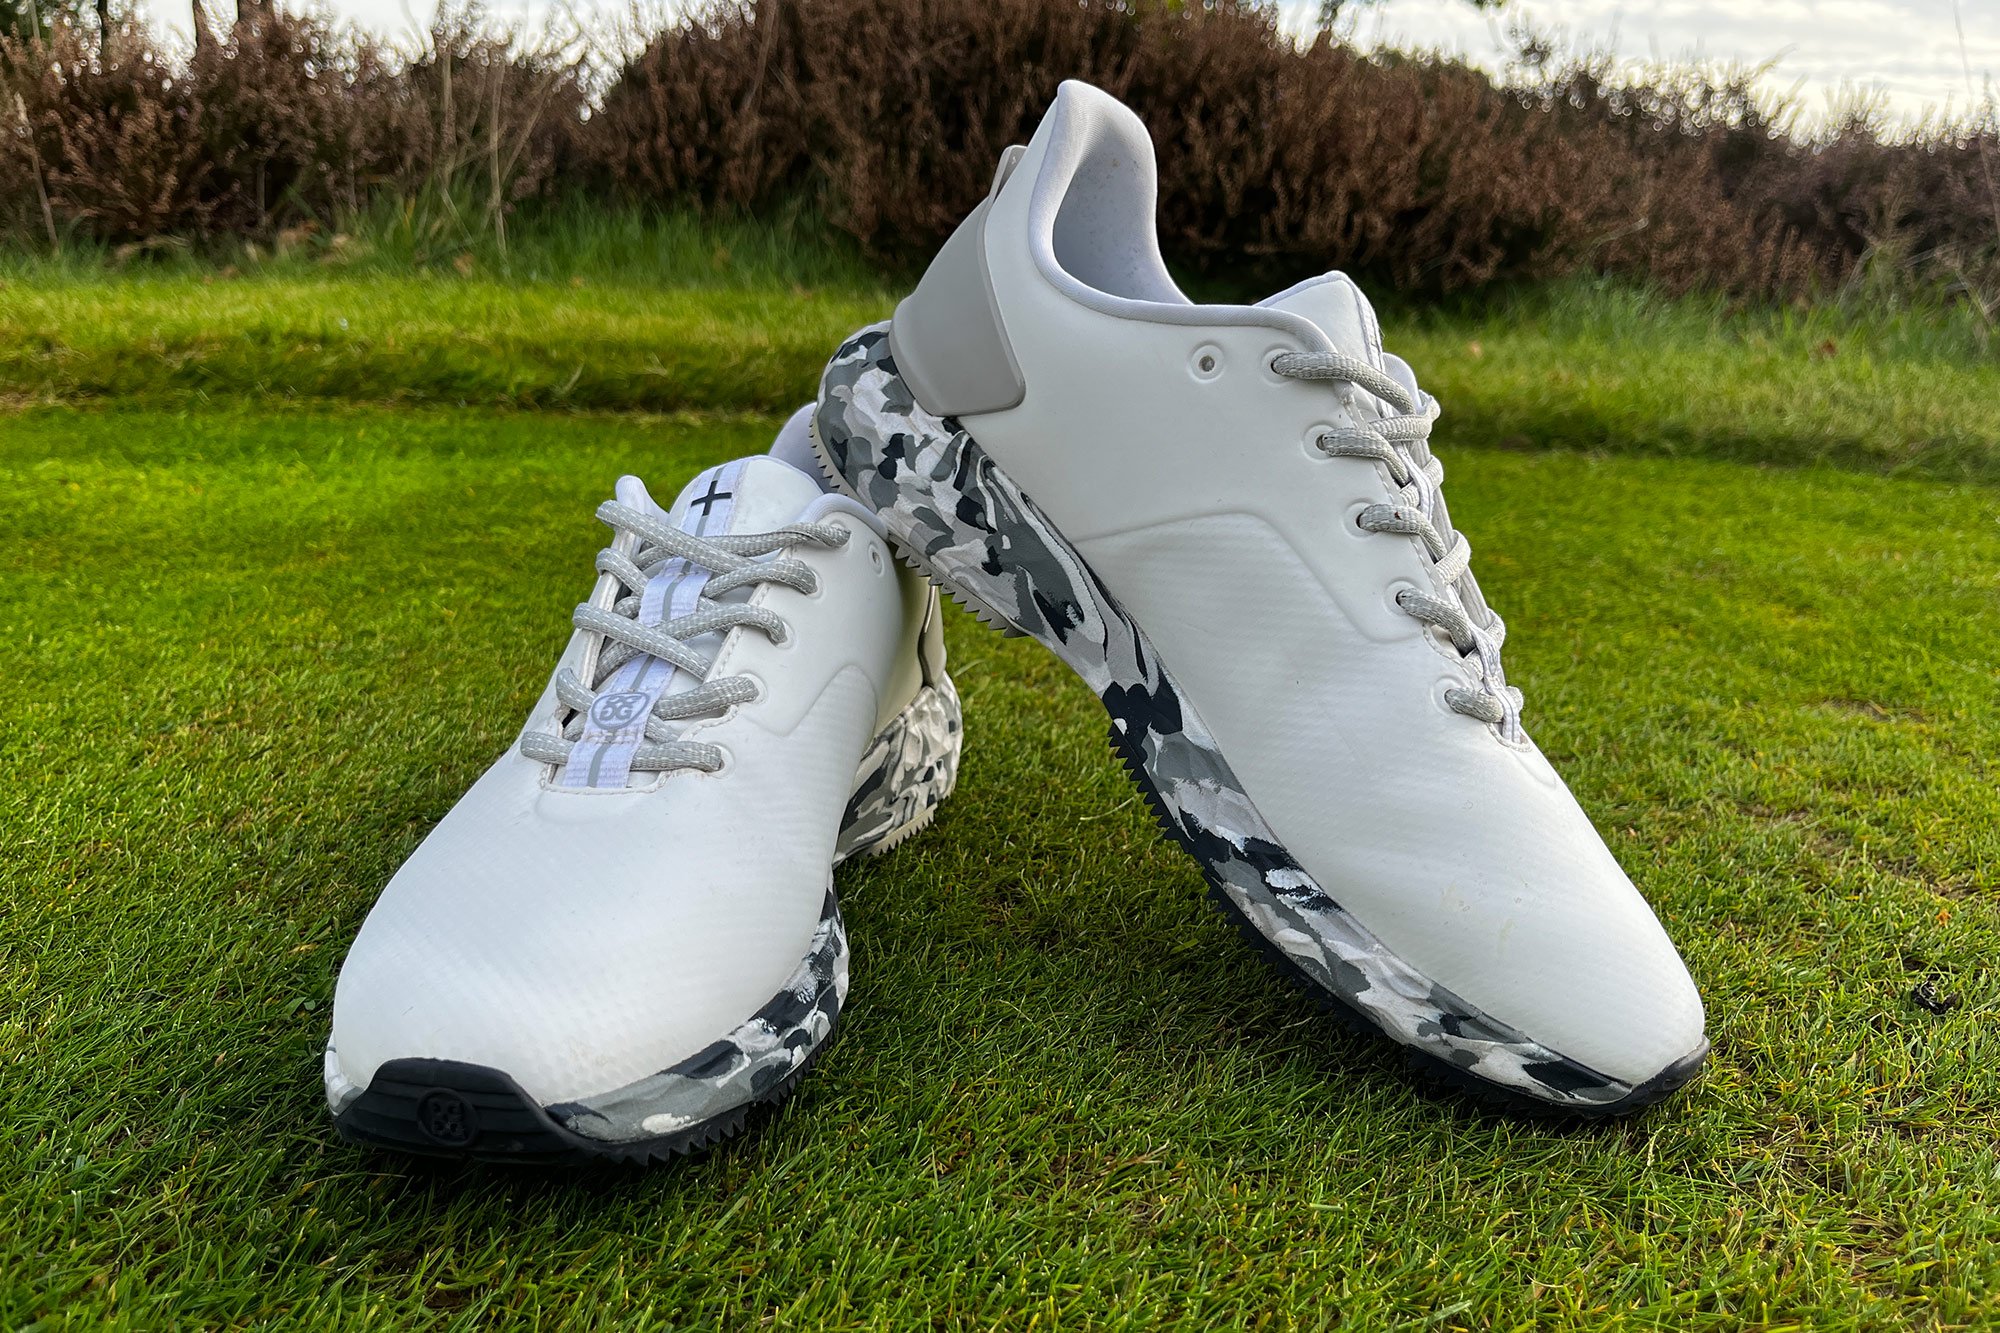 G/FORE Gallivanter Review: The Best Looking Shoes in Golf?